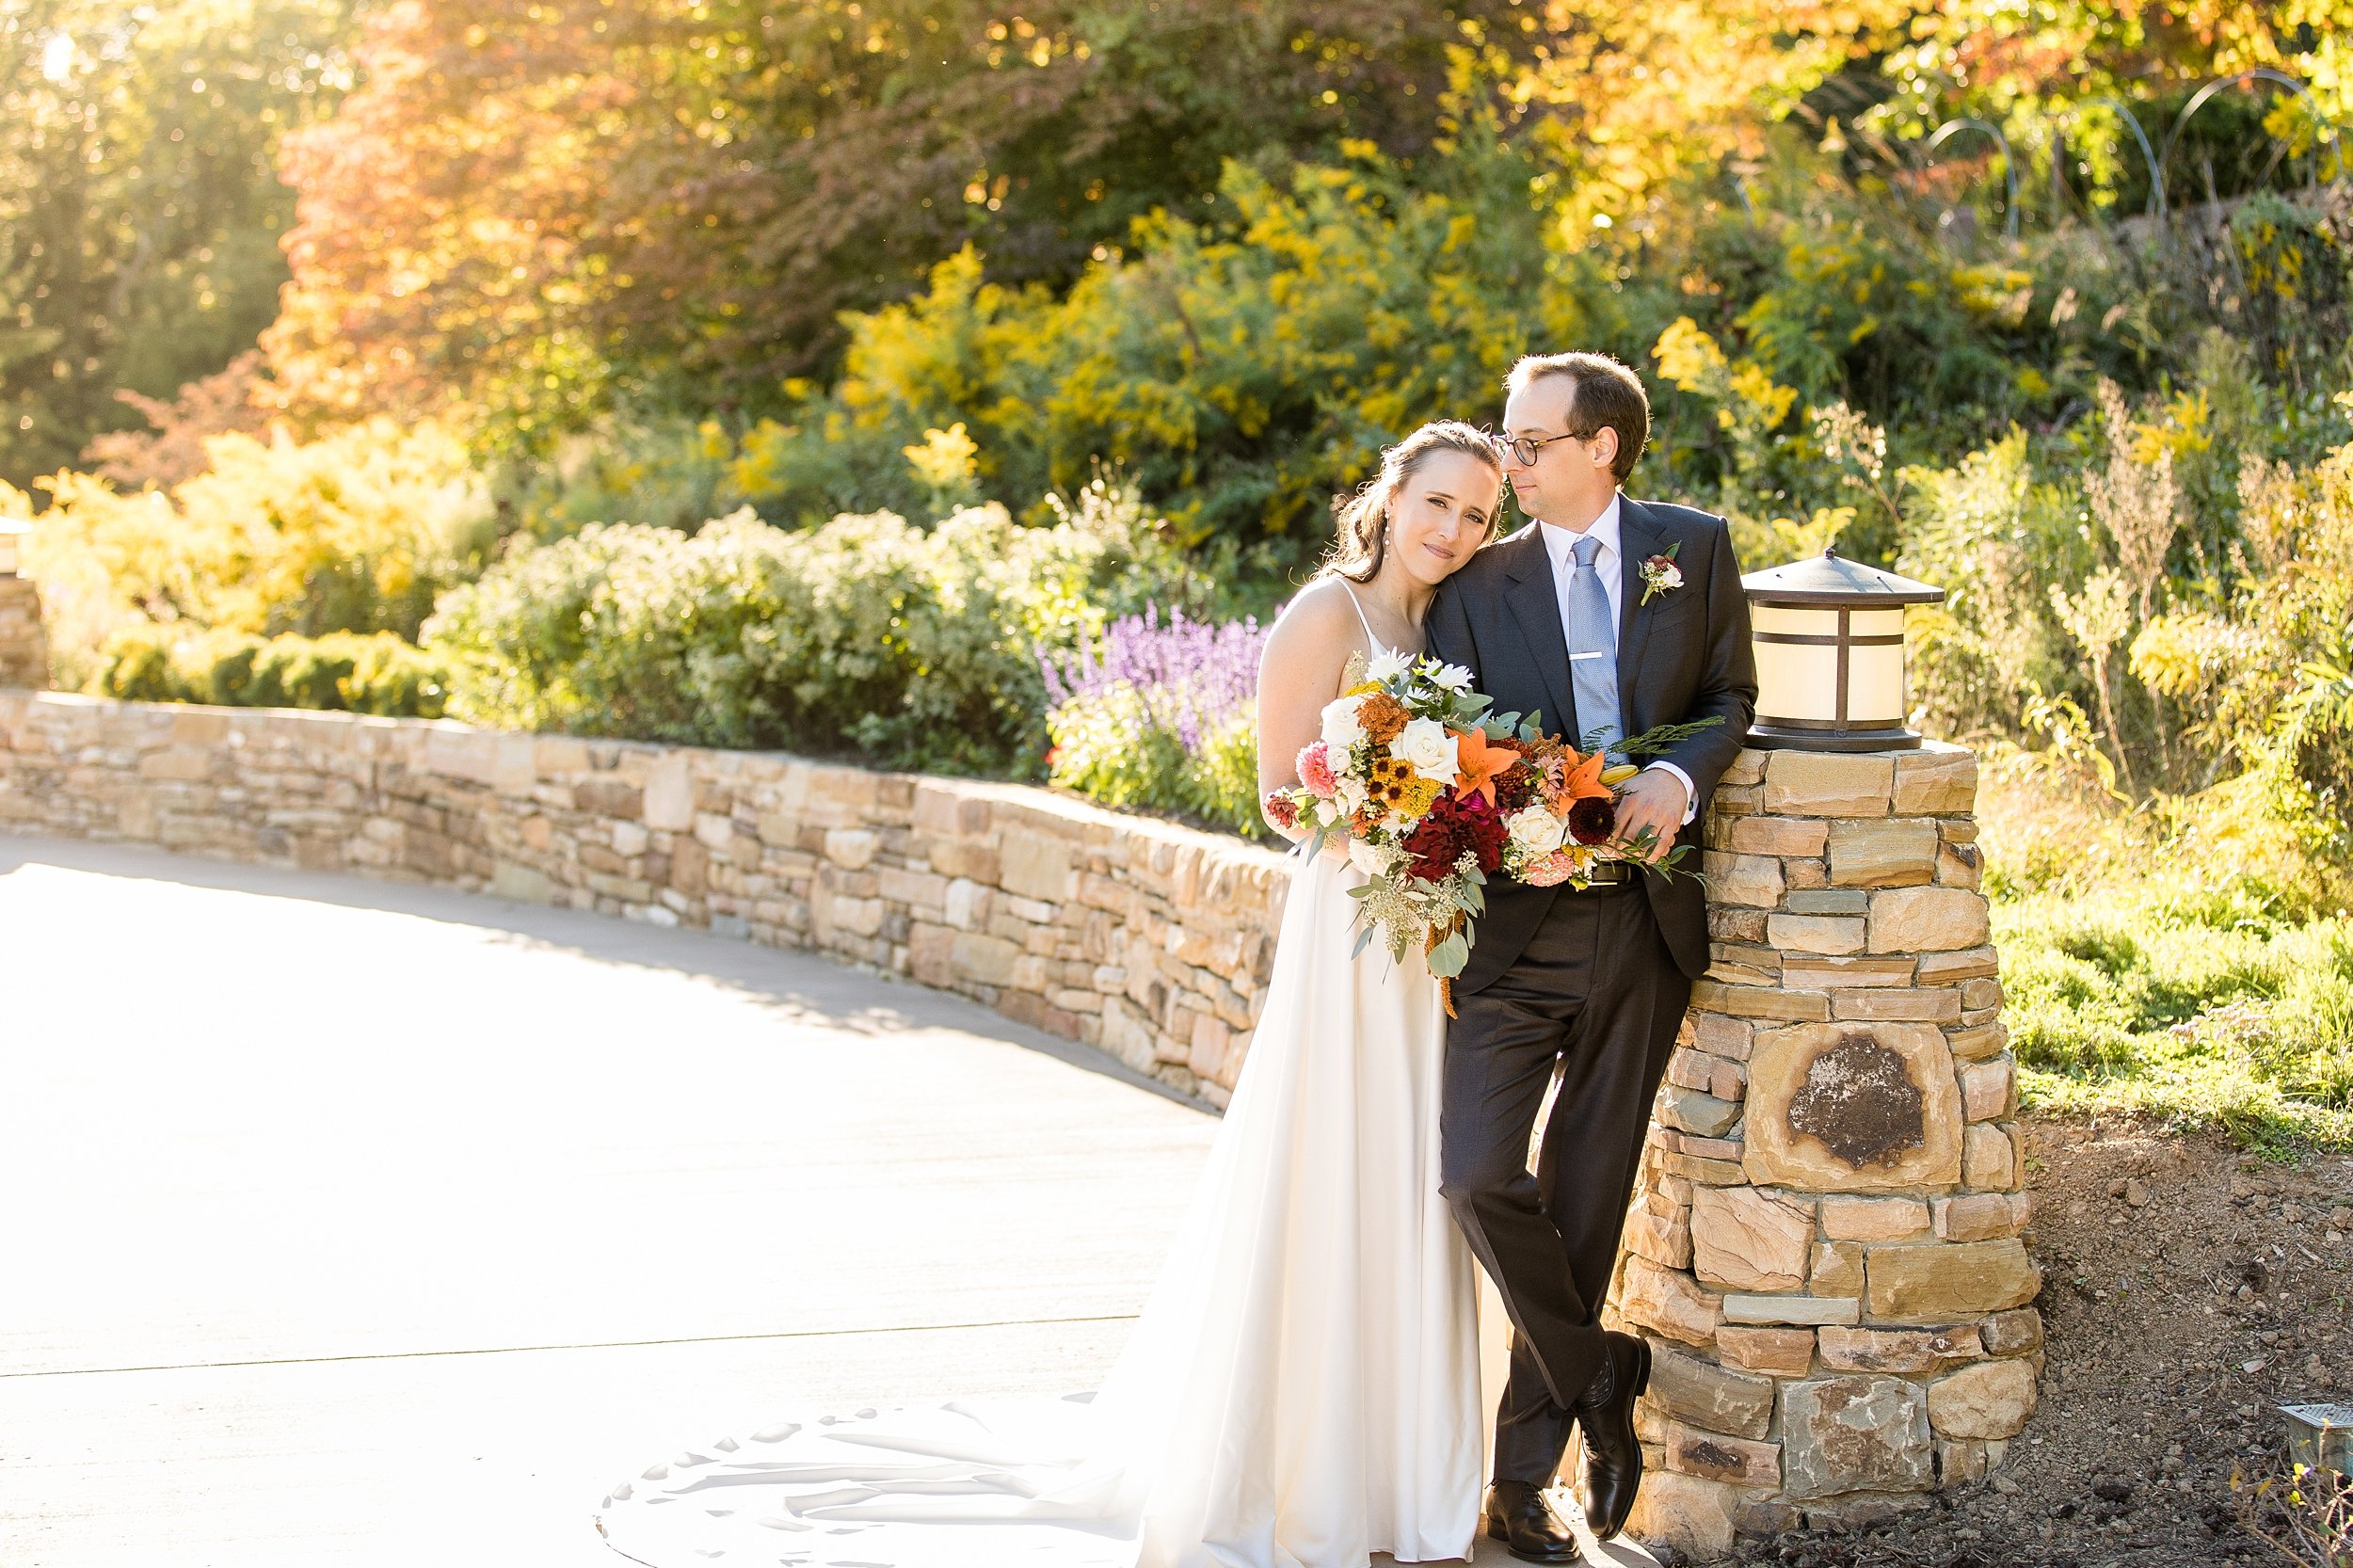  Something I LOVE about this walkway is that it has white cement… which acts as a great natural reflector, effectively “popping” soft light back into my couple’s faces, creating a flattering look for their skin. This wasn’t a location we had original